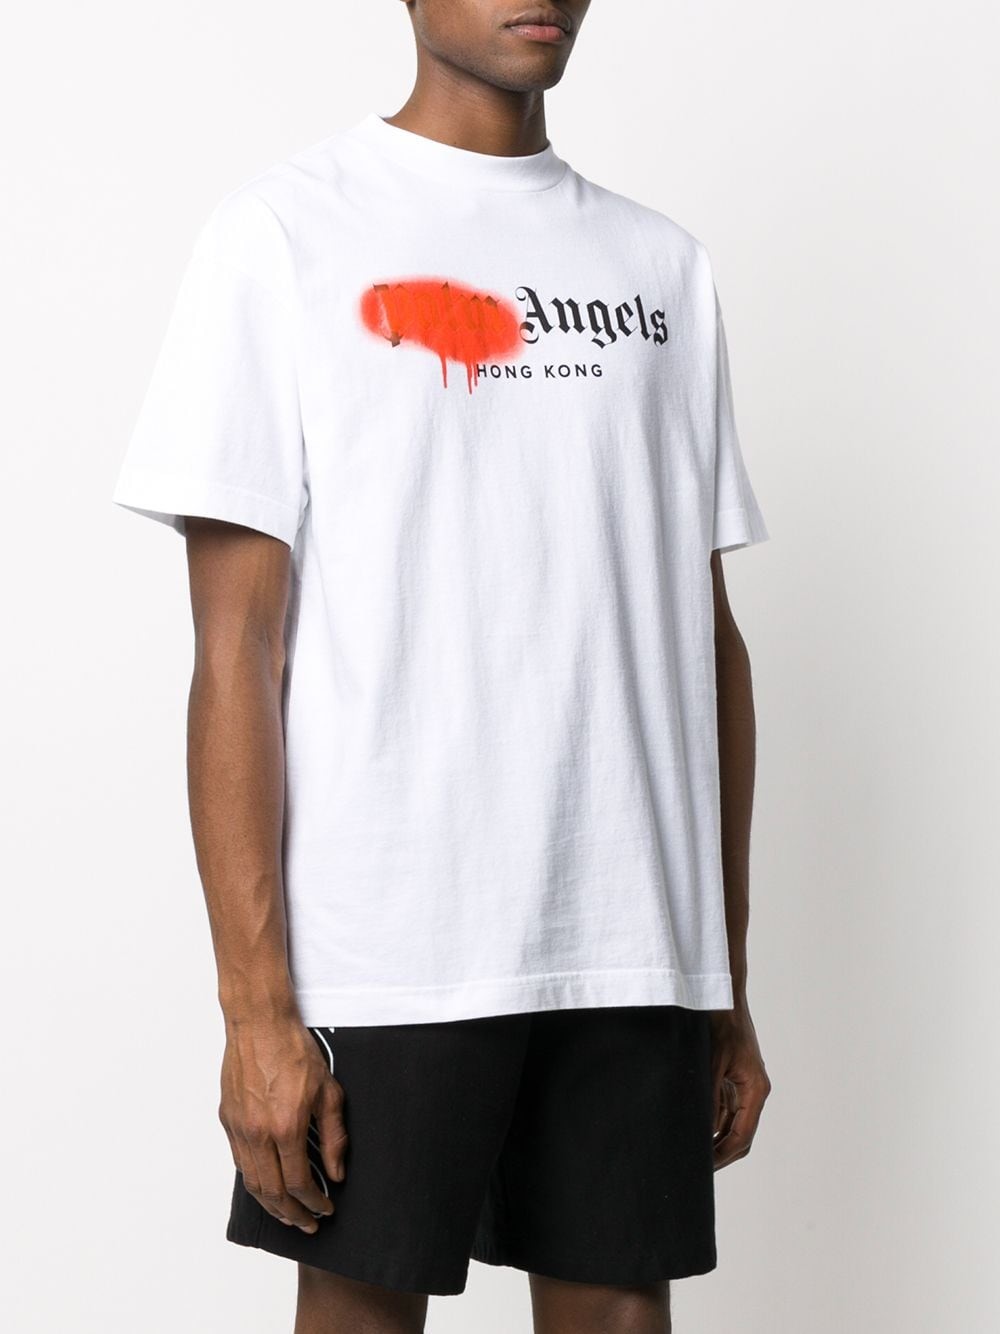 palm angels HONG KONG LOGO T-SHIRT available on montiboutique.com - 33762